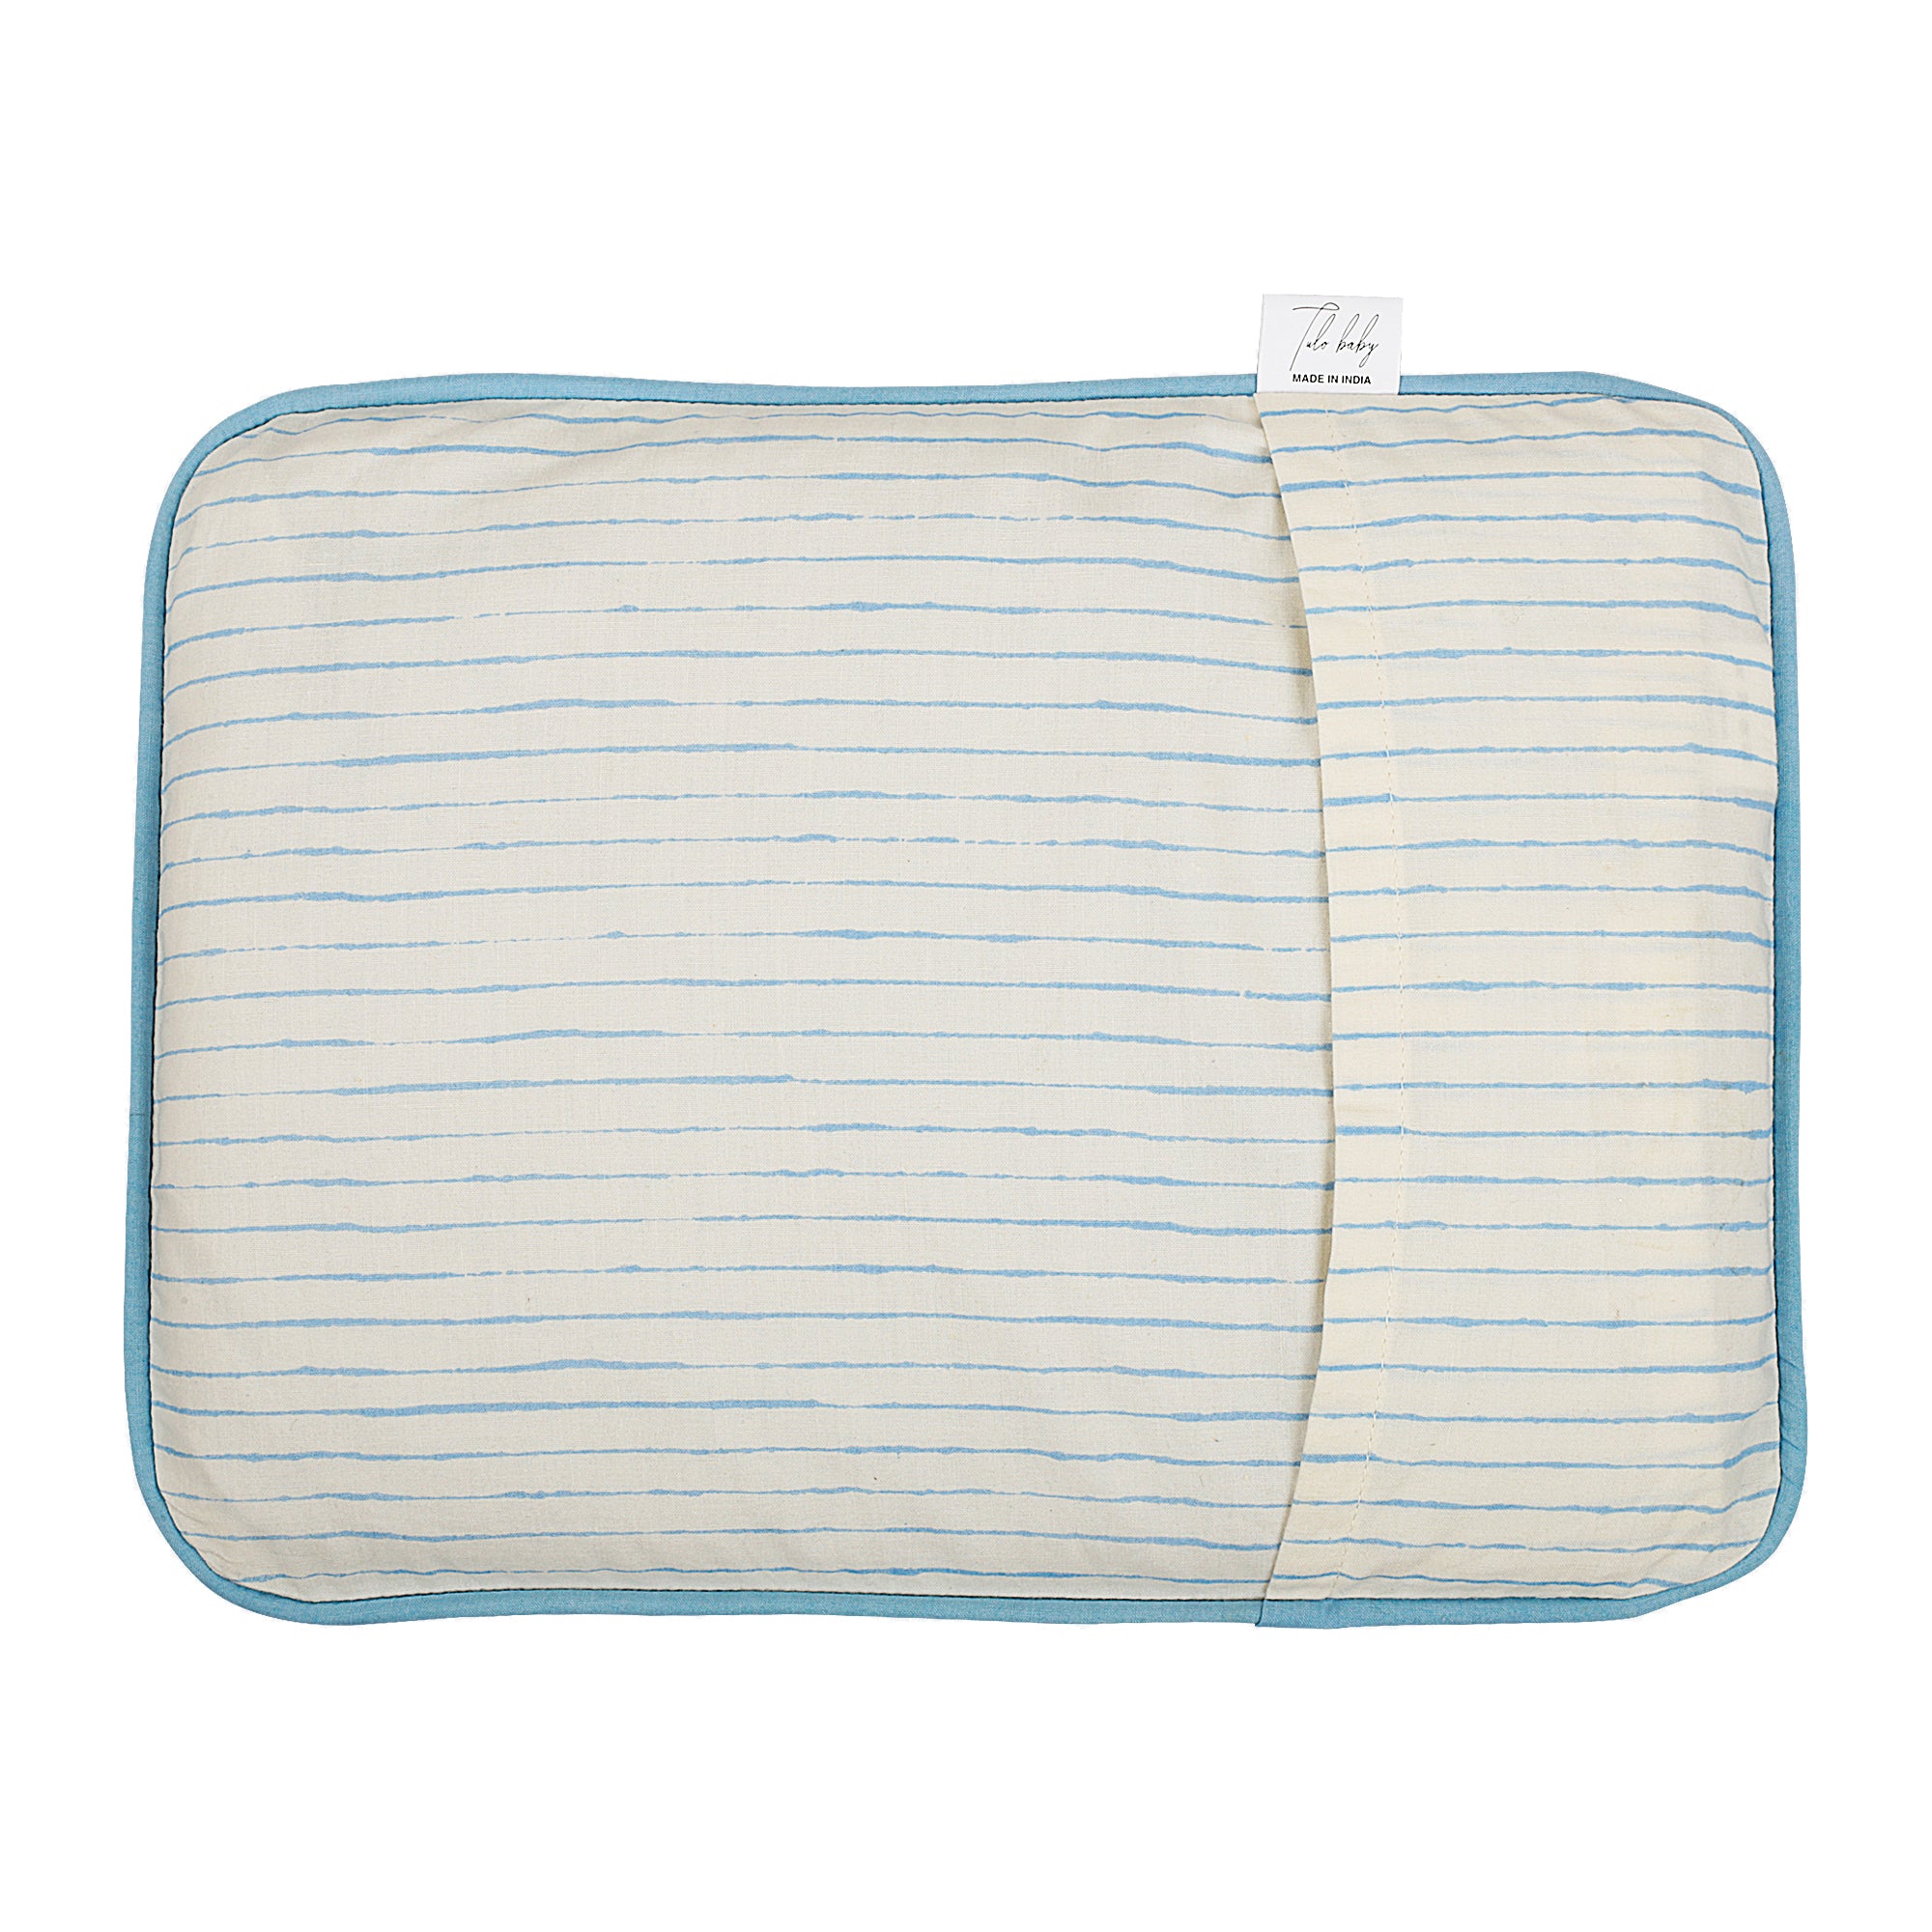 DUSK BLUE LINE MUSTARD PILLOW COVER AND FILLER SET - CLEARANCE